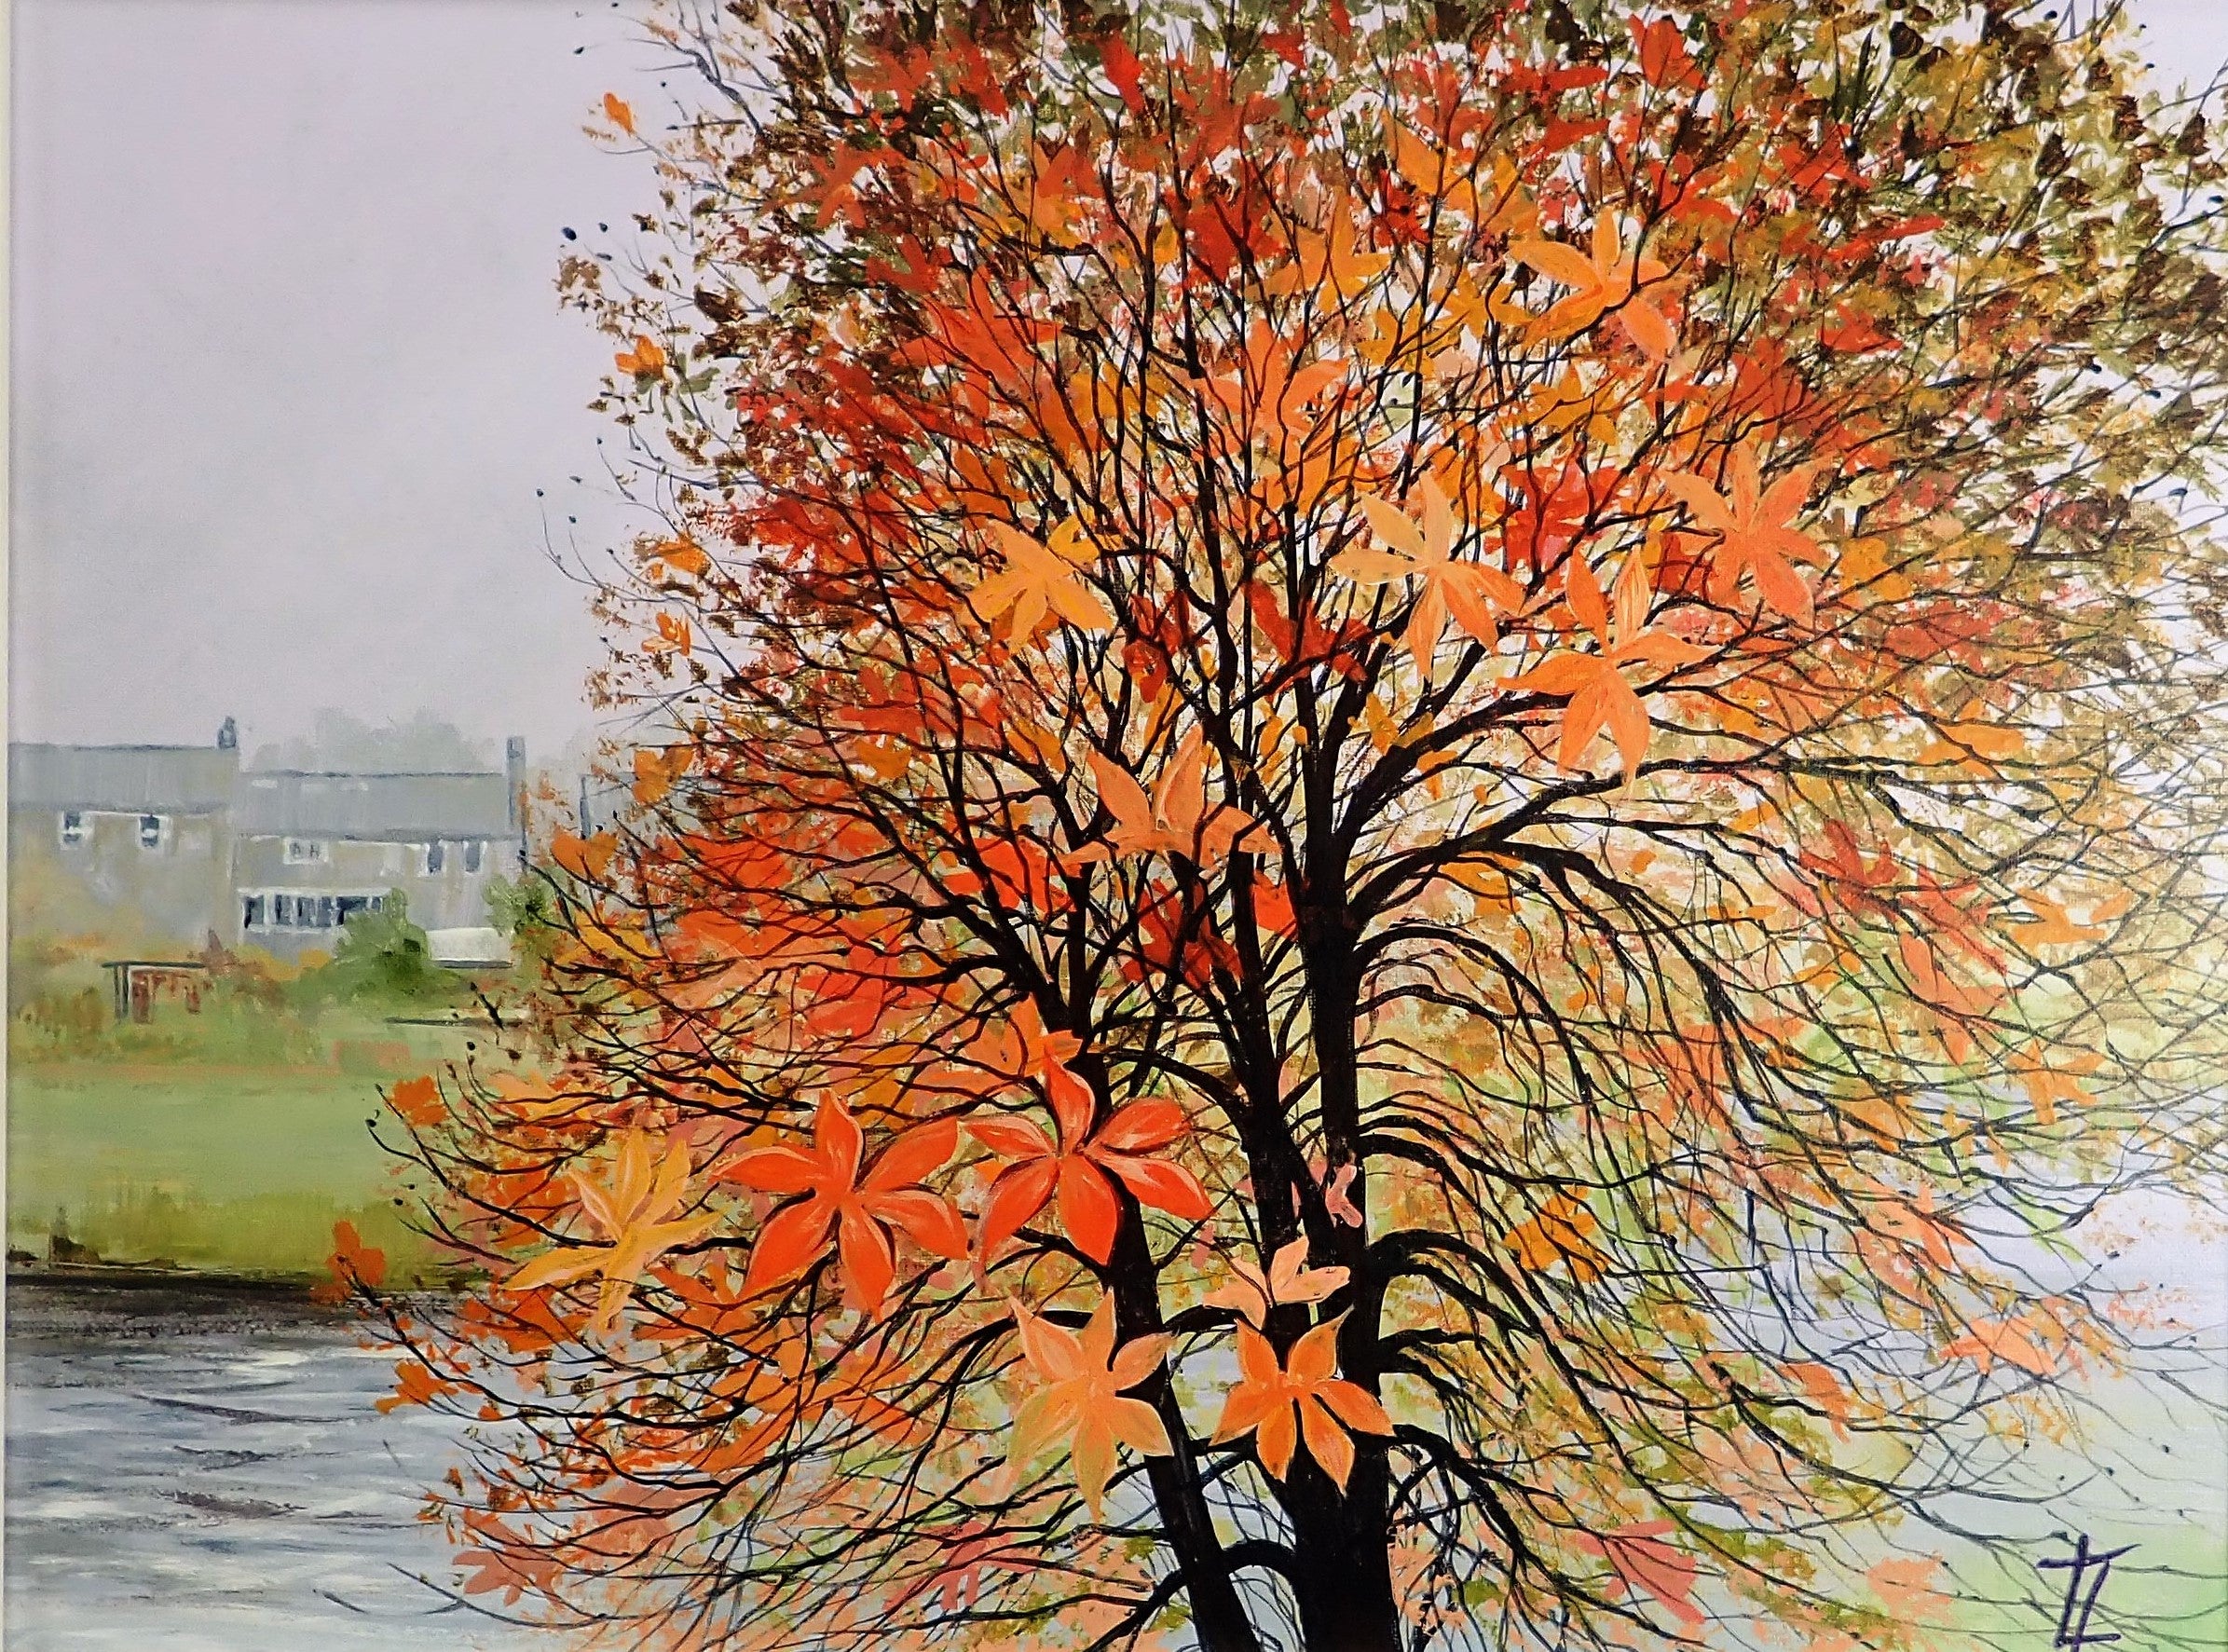 Autumn Chestnut by The River Coquet-  Original Painting